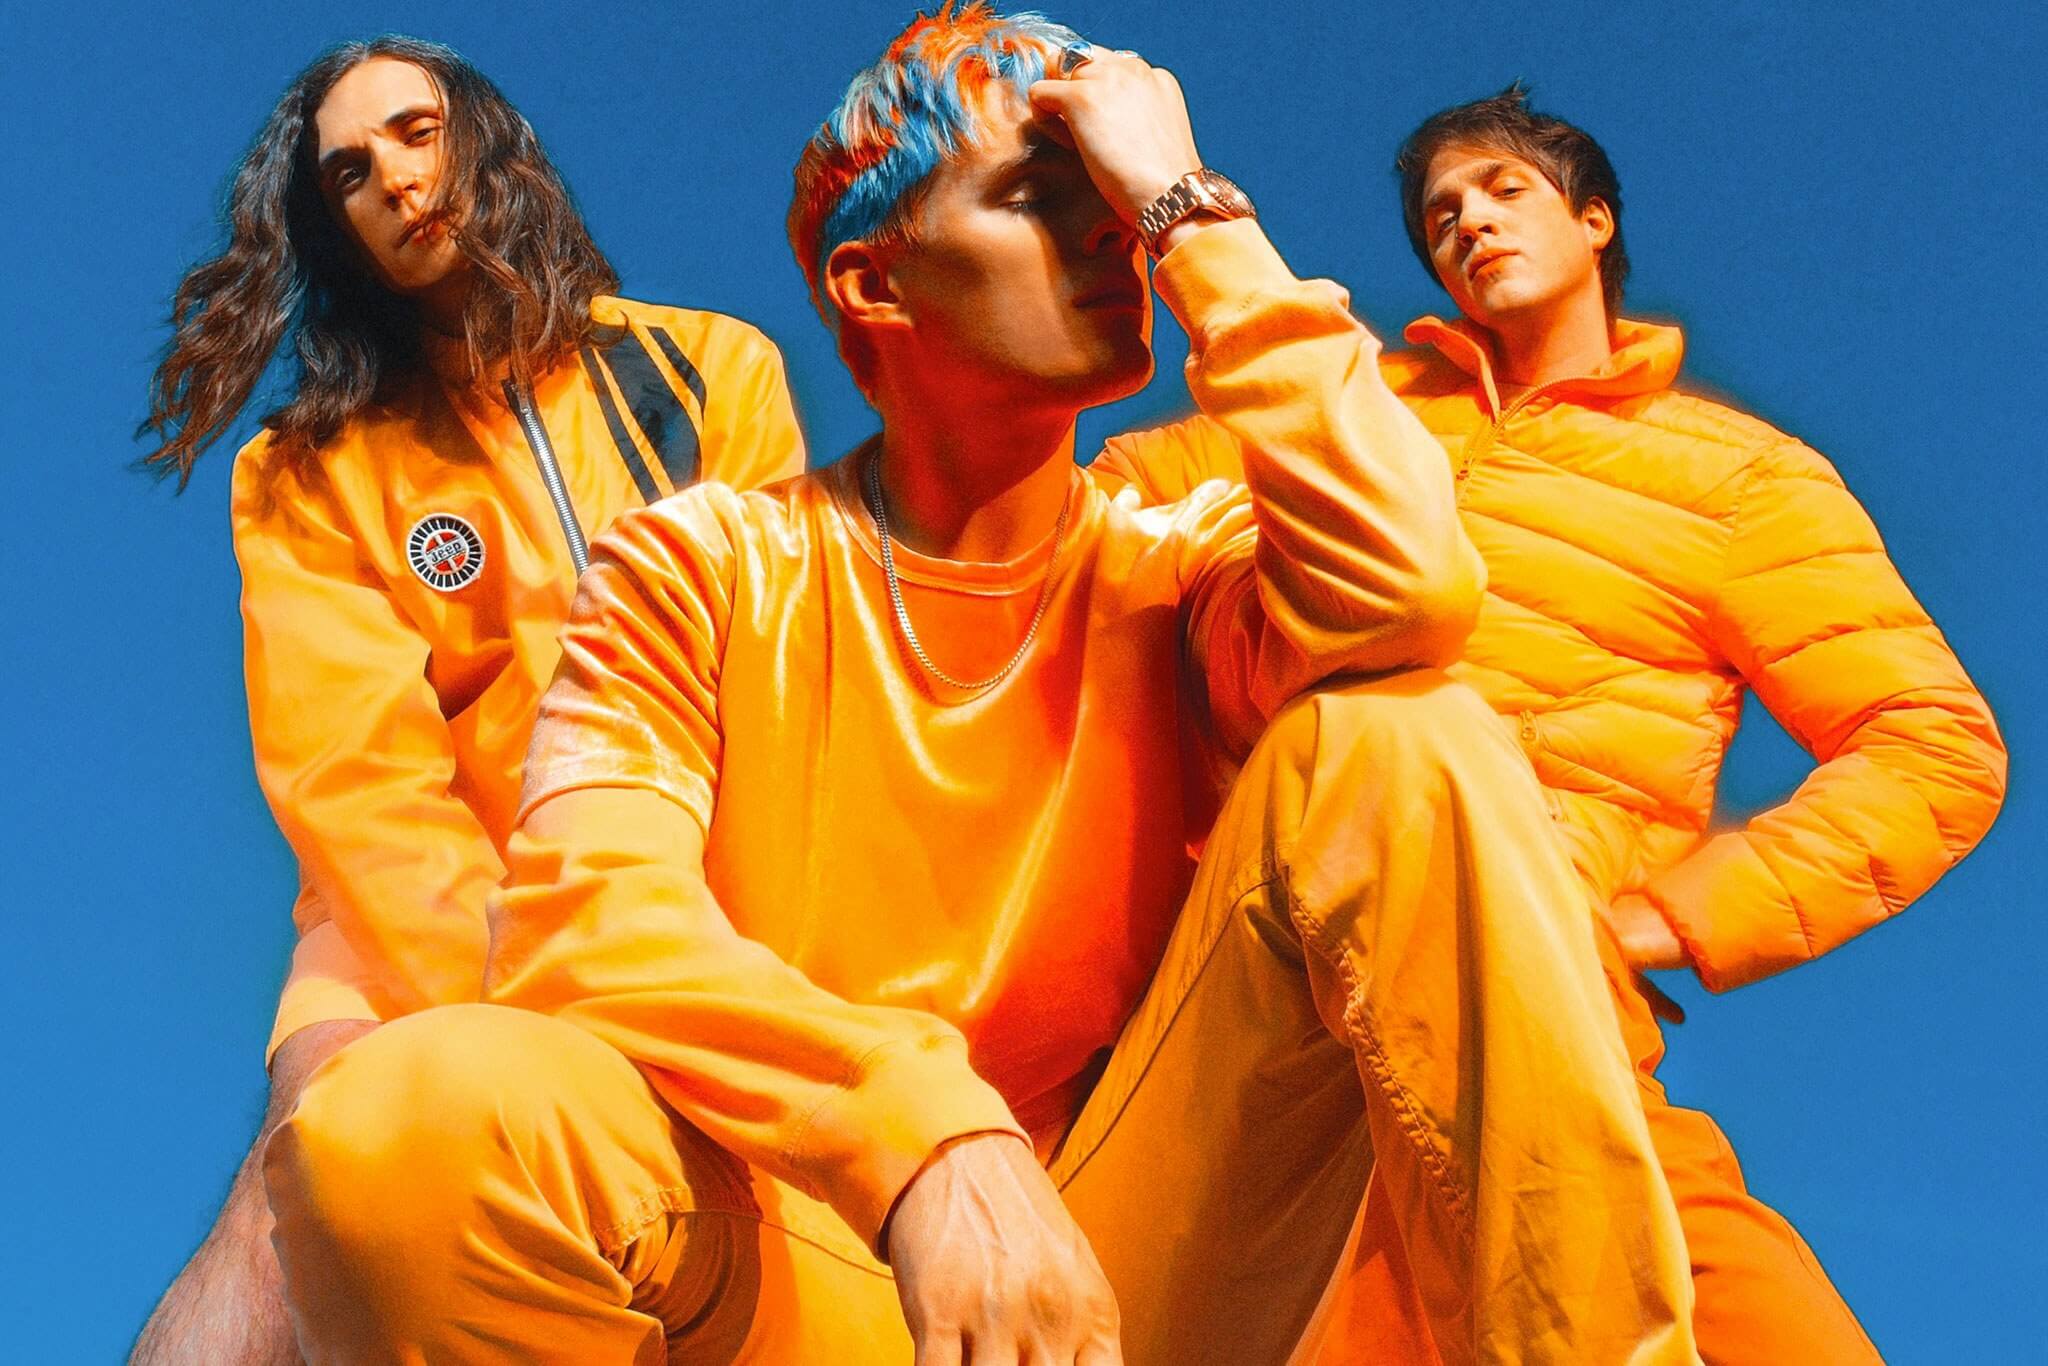 WATERPARKS DEBUT NEW VIDEO FOR “VIOLET!”